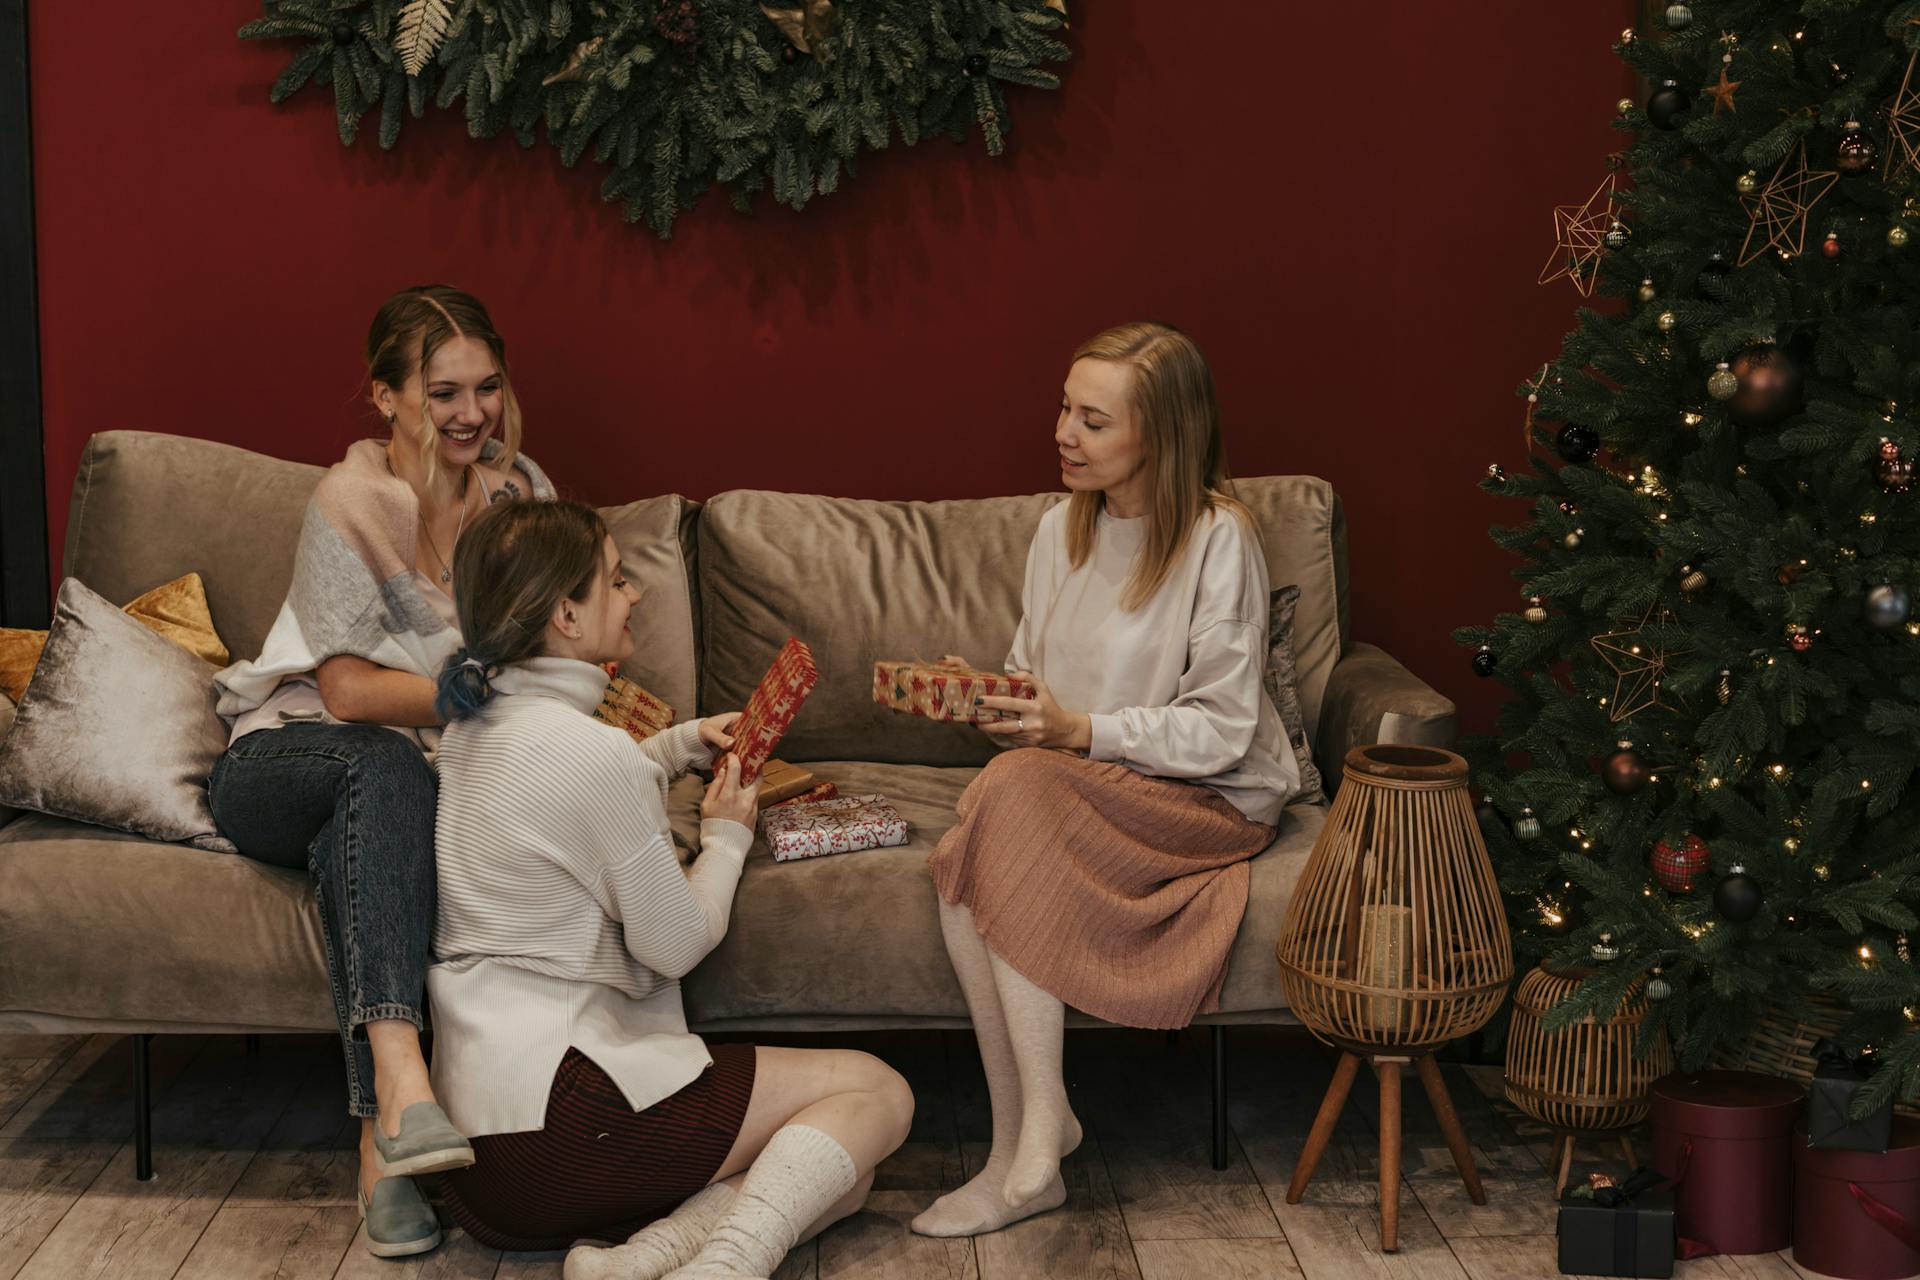 A bunch of women exchanging Christmas presents | Source: Pexels